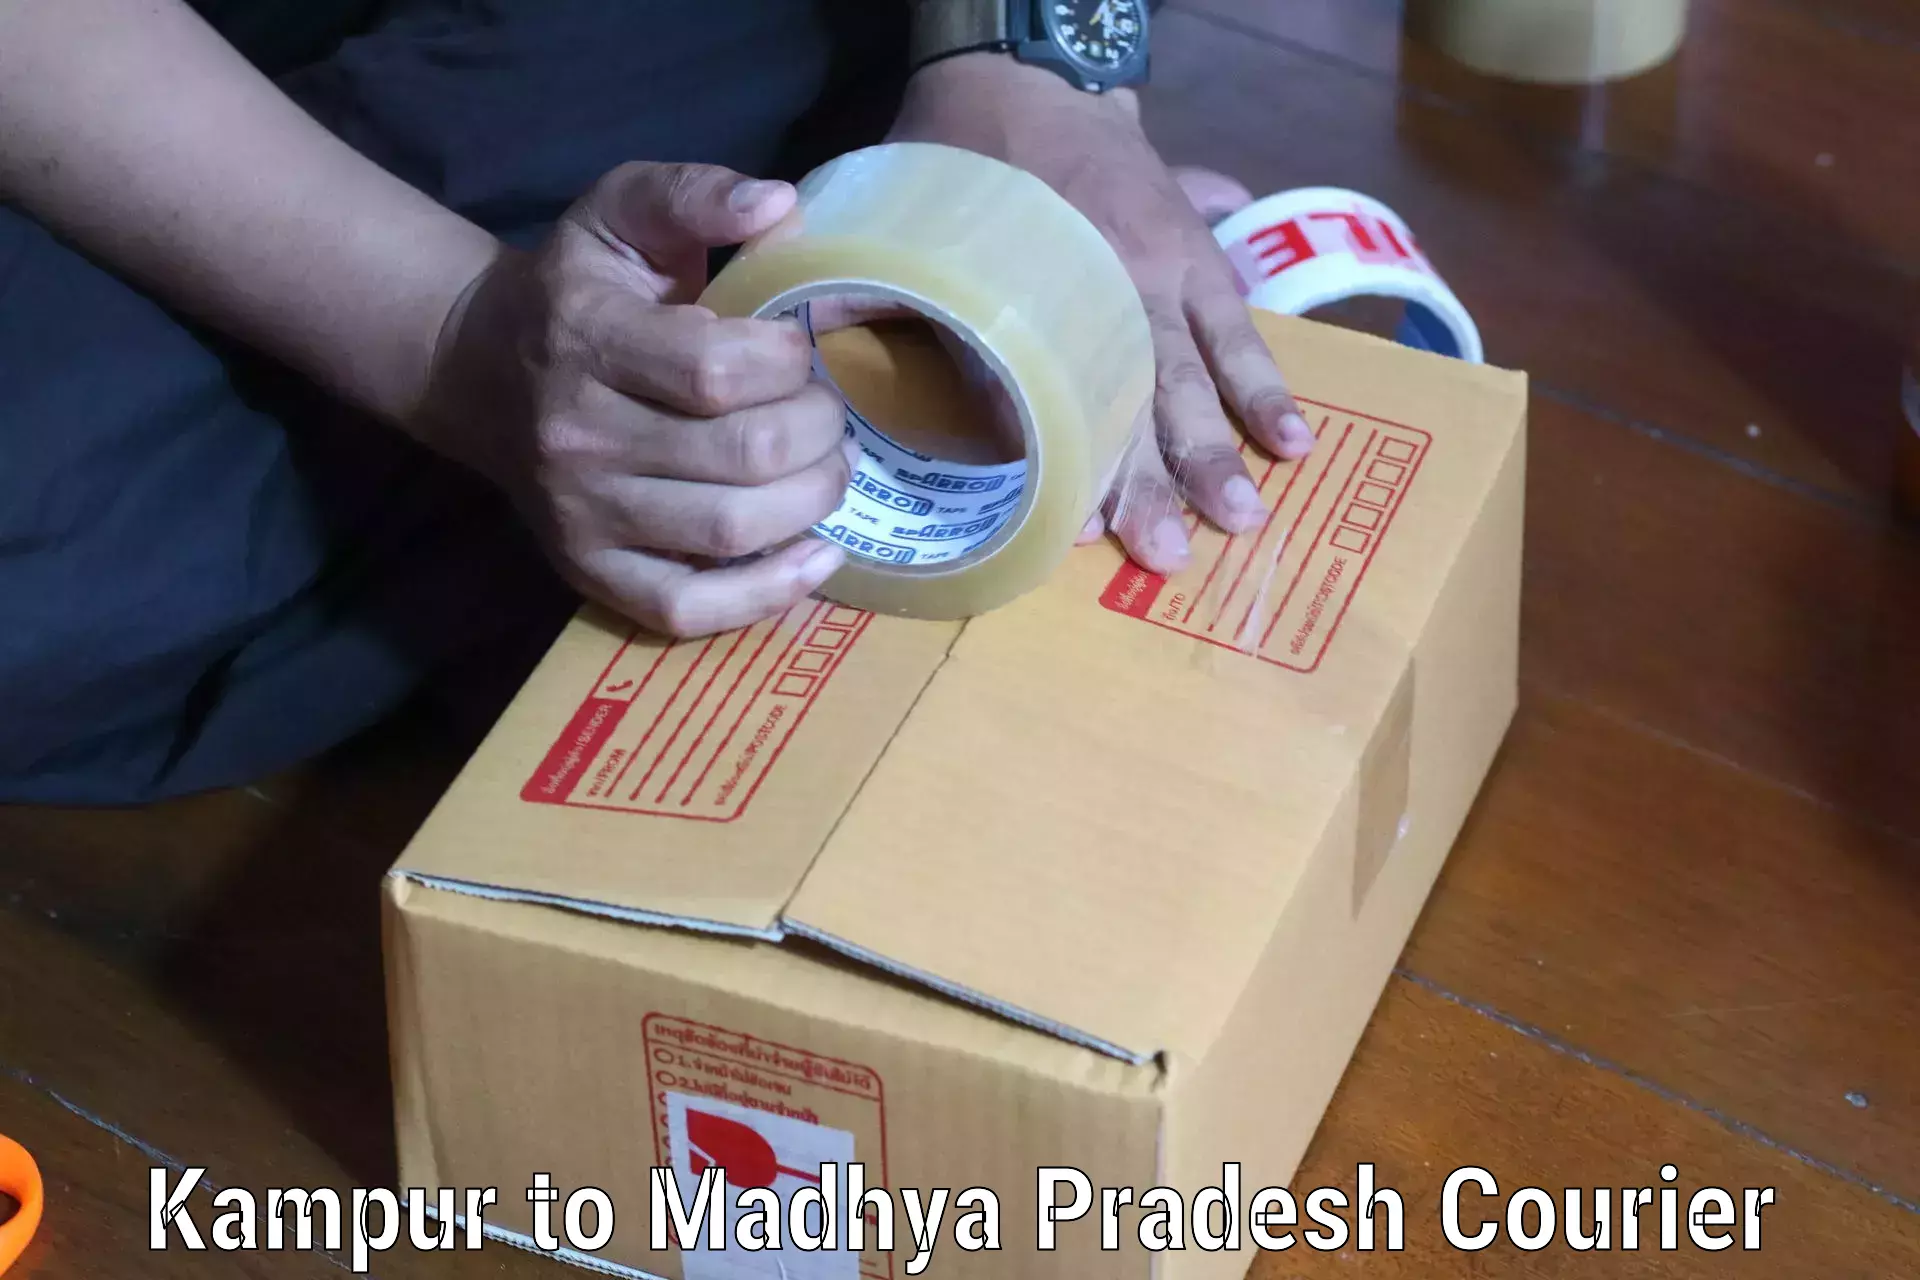 Courier service comparison in Kampur to Madwas